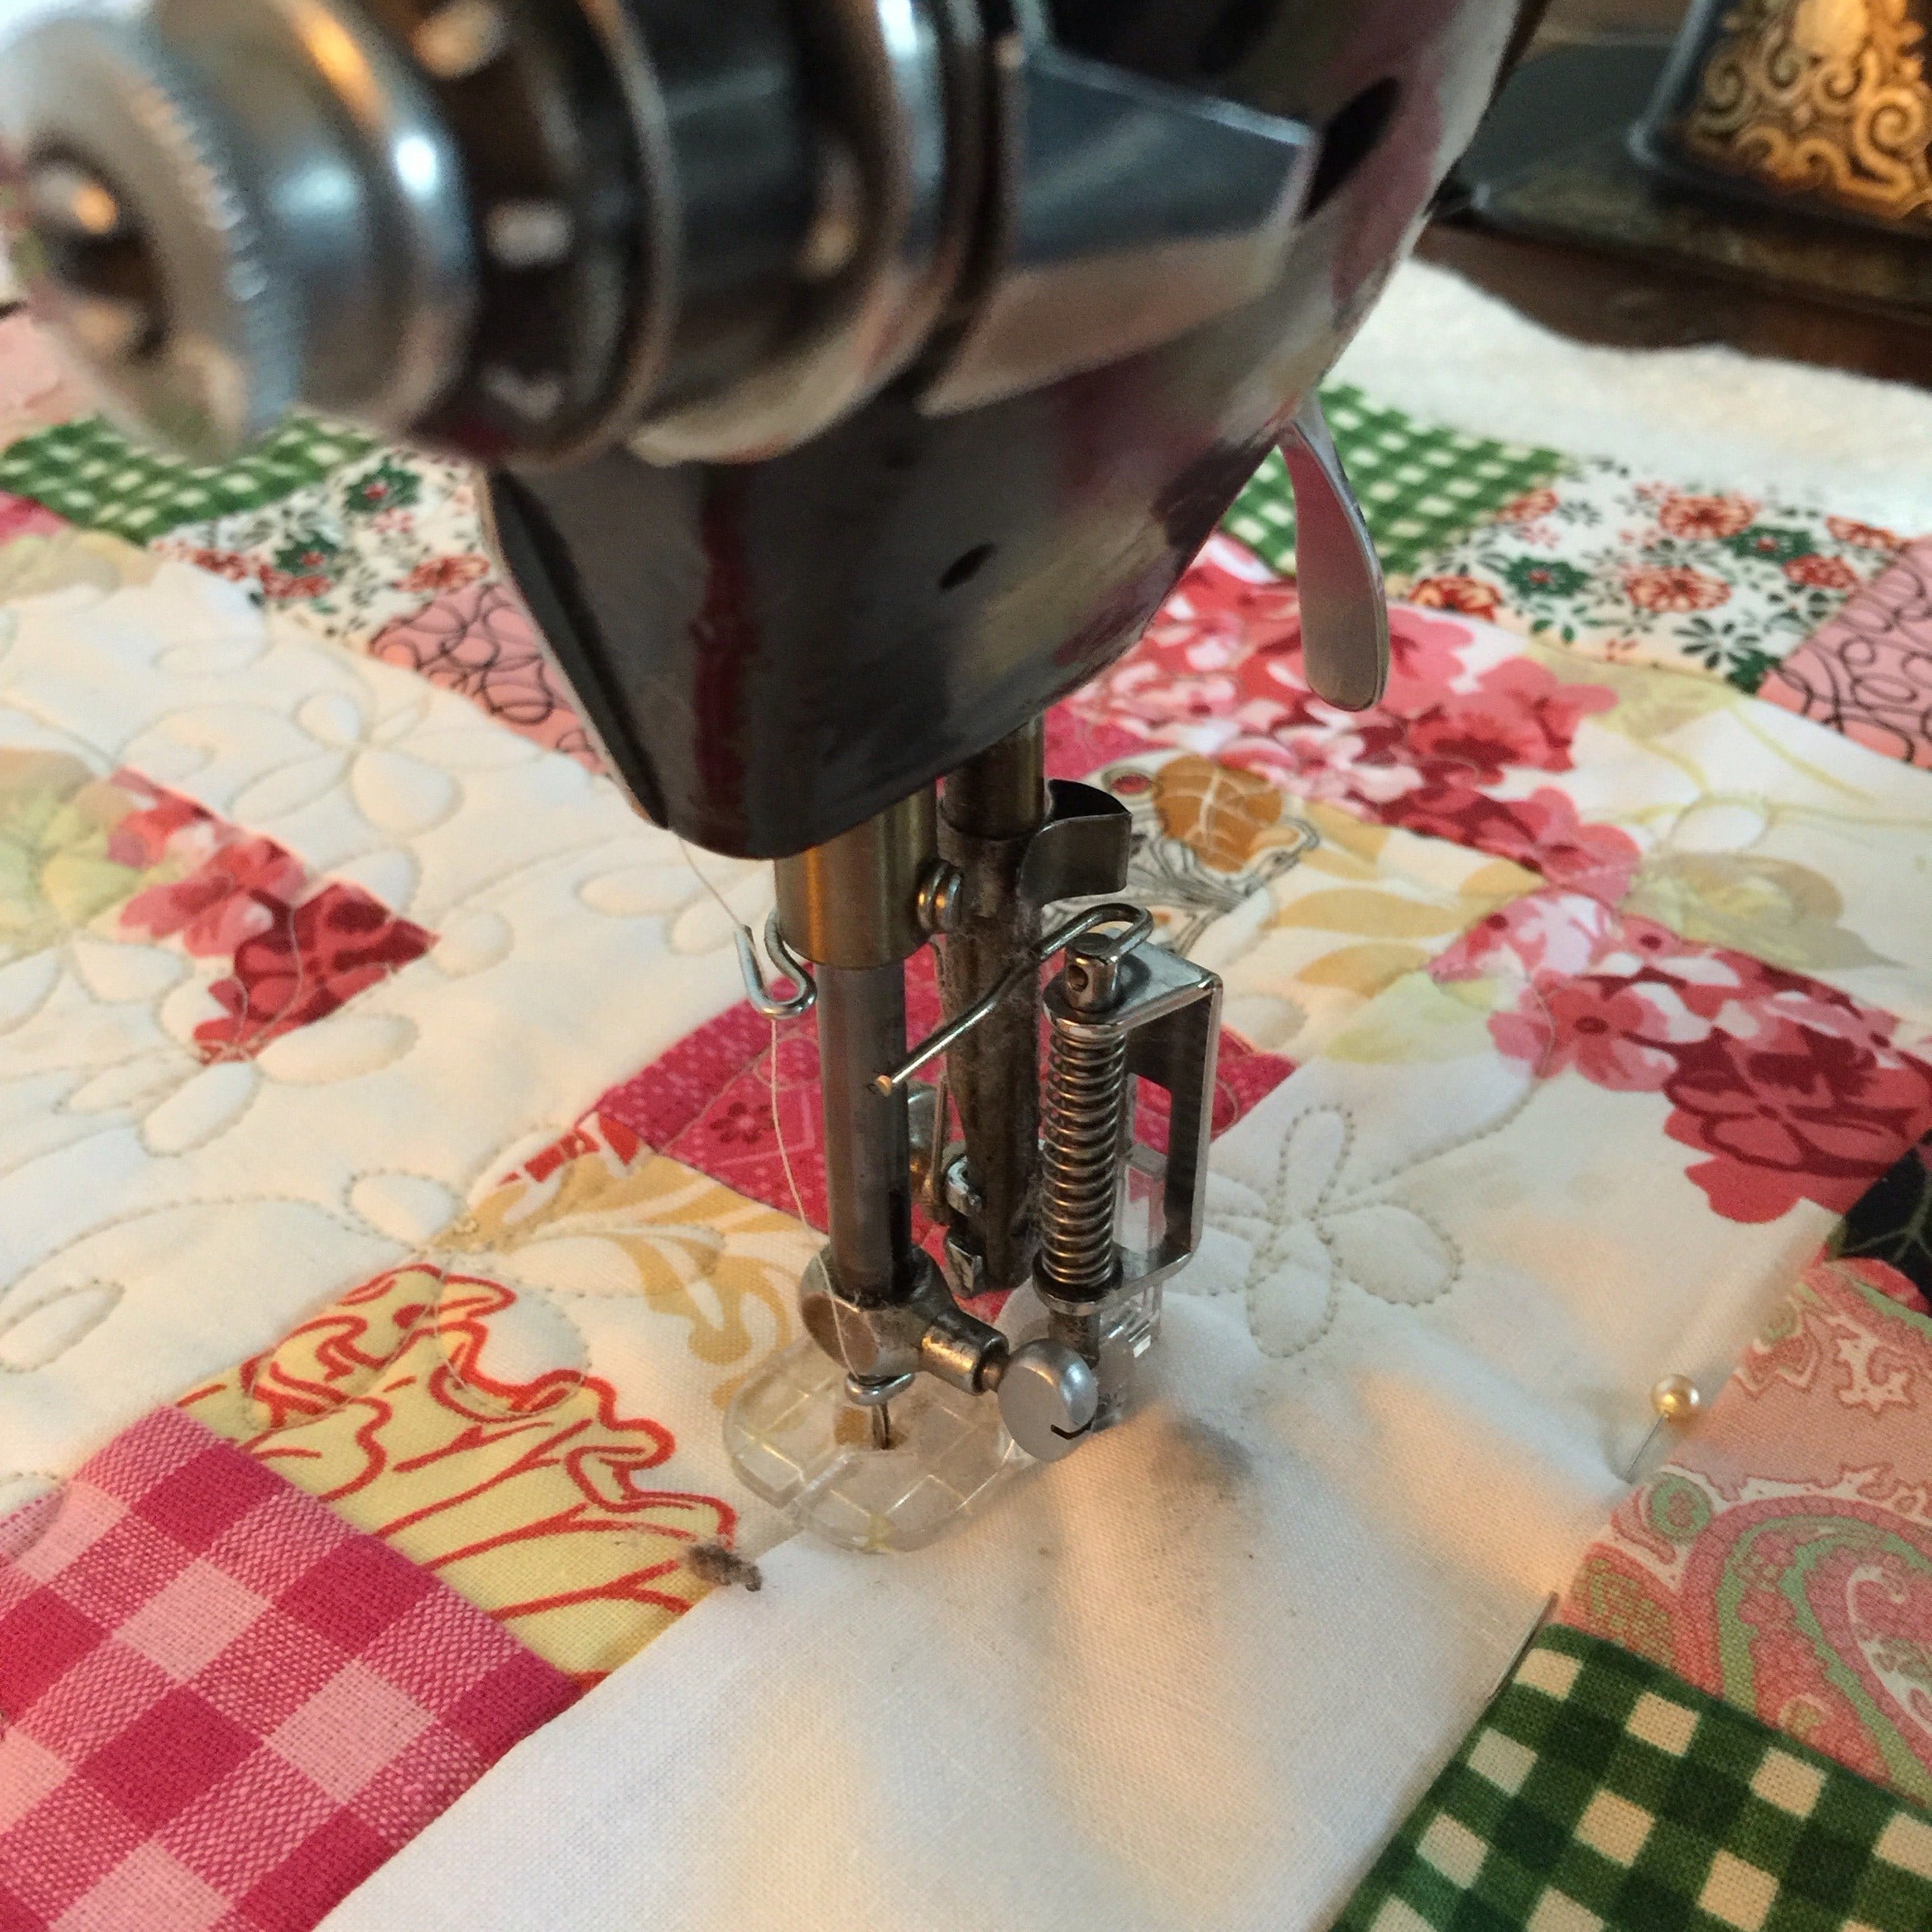 How to Thread a Singer 201 Sewing Machine — Chatterbox Quilts